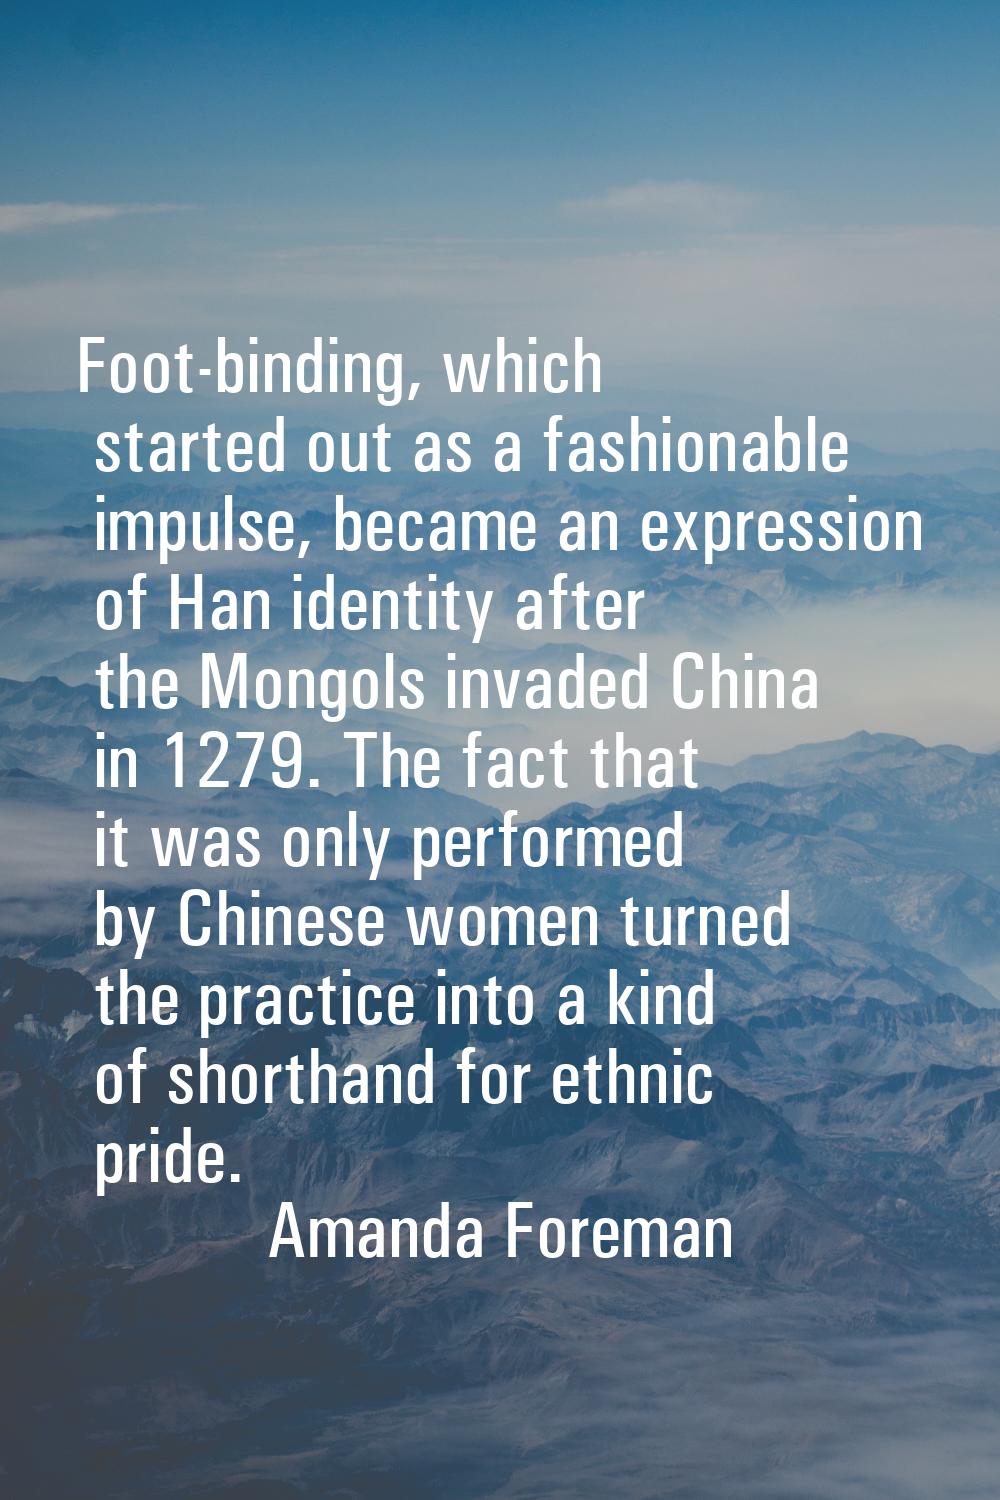 Foot-binding, which started out as a fashionable impulse, became an expression of Han identity afte